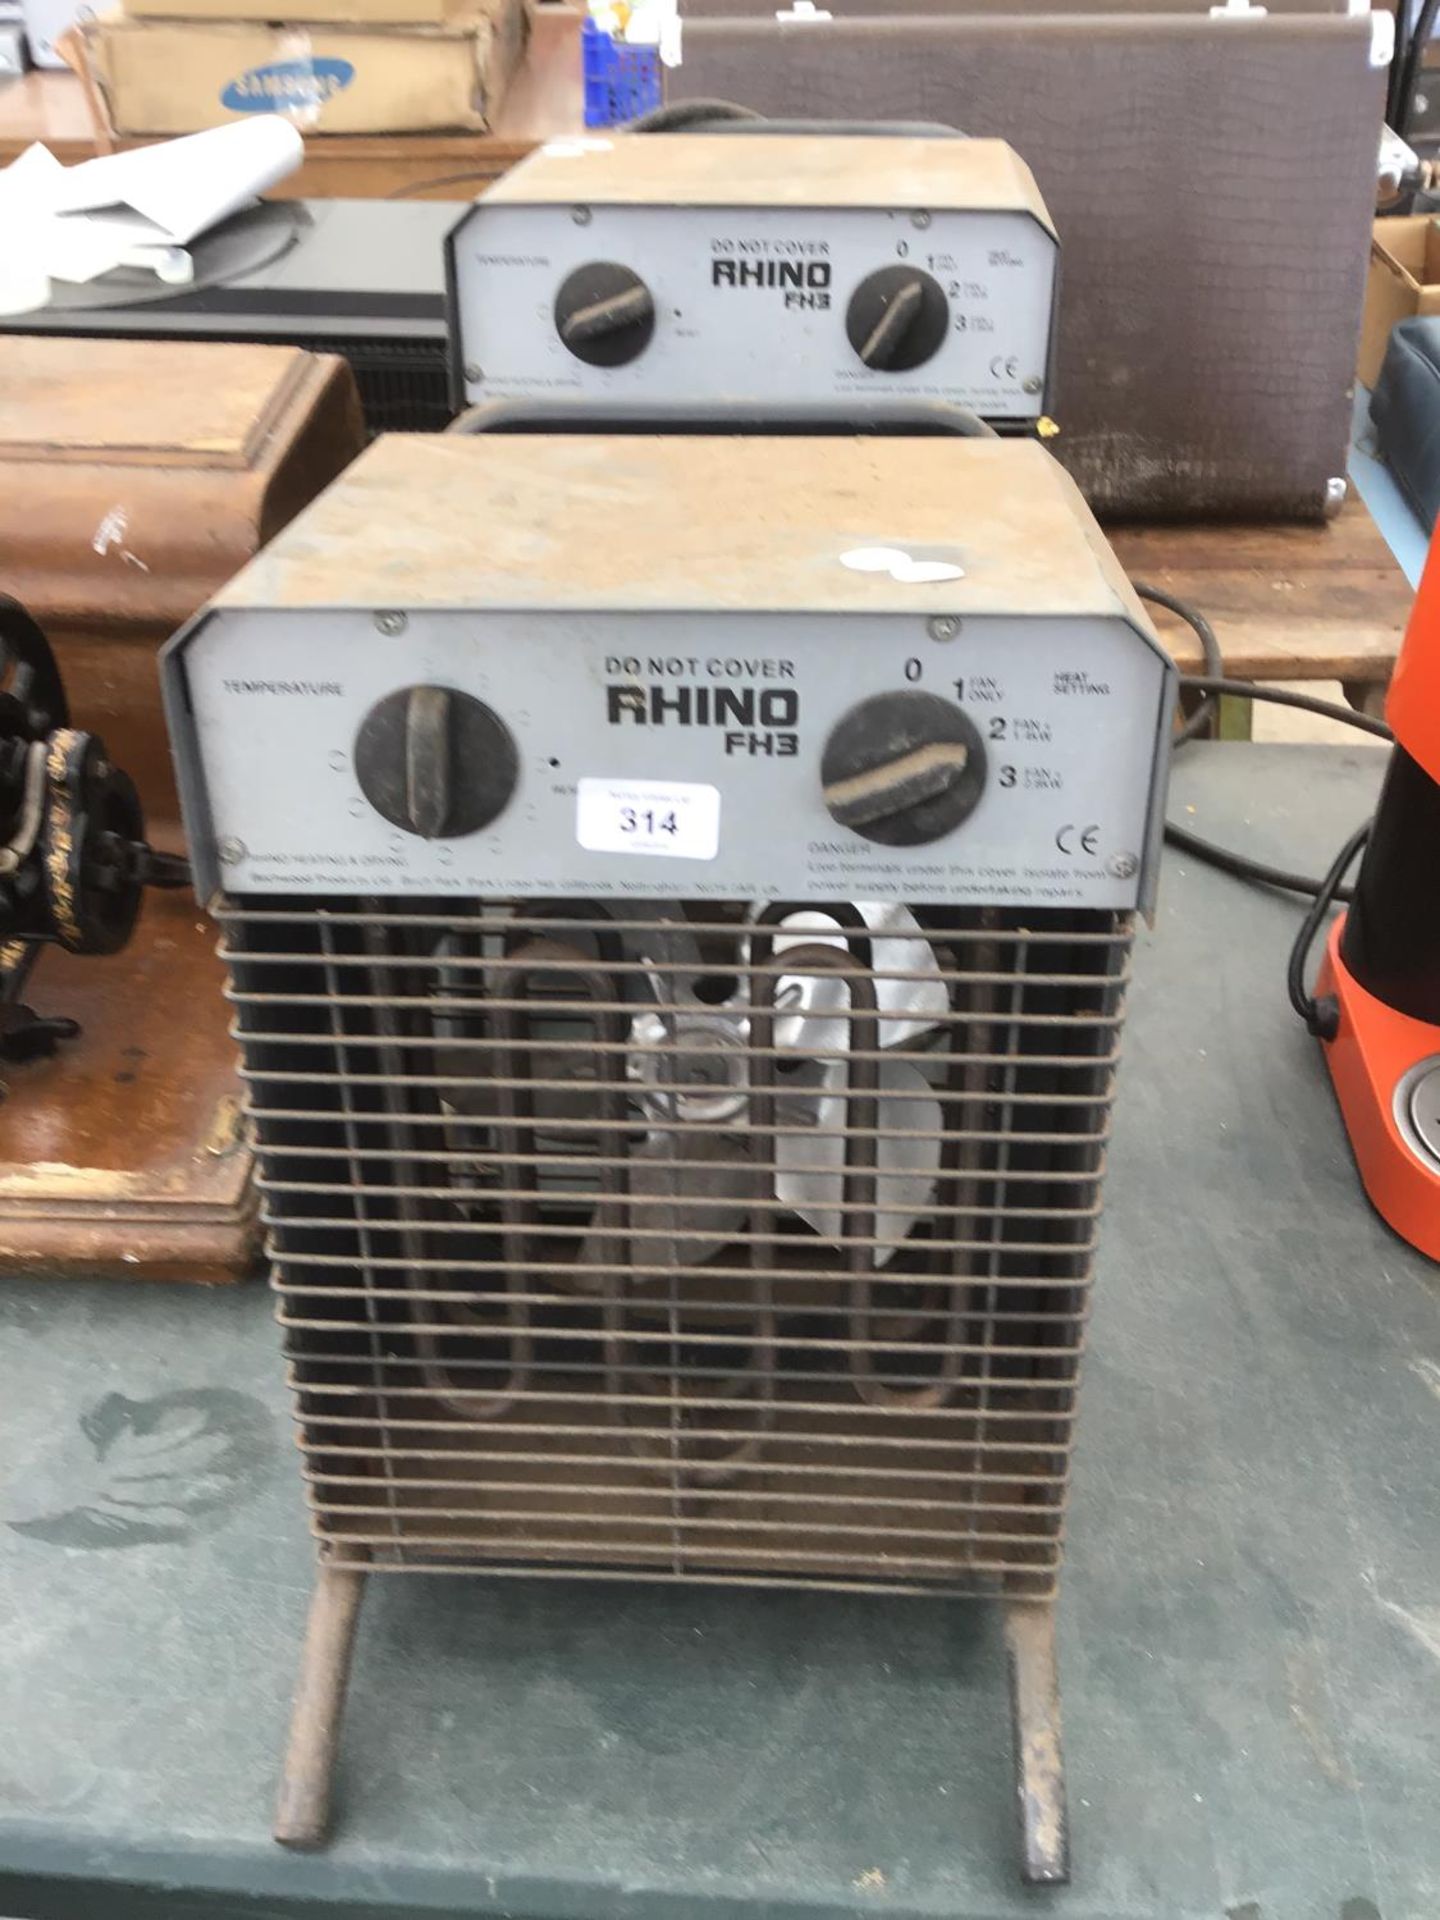 TWO RHINO FH3 HEATERS/FANS IN WORKING ORDER